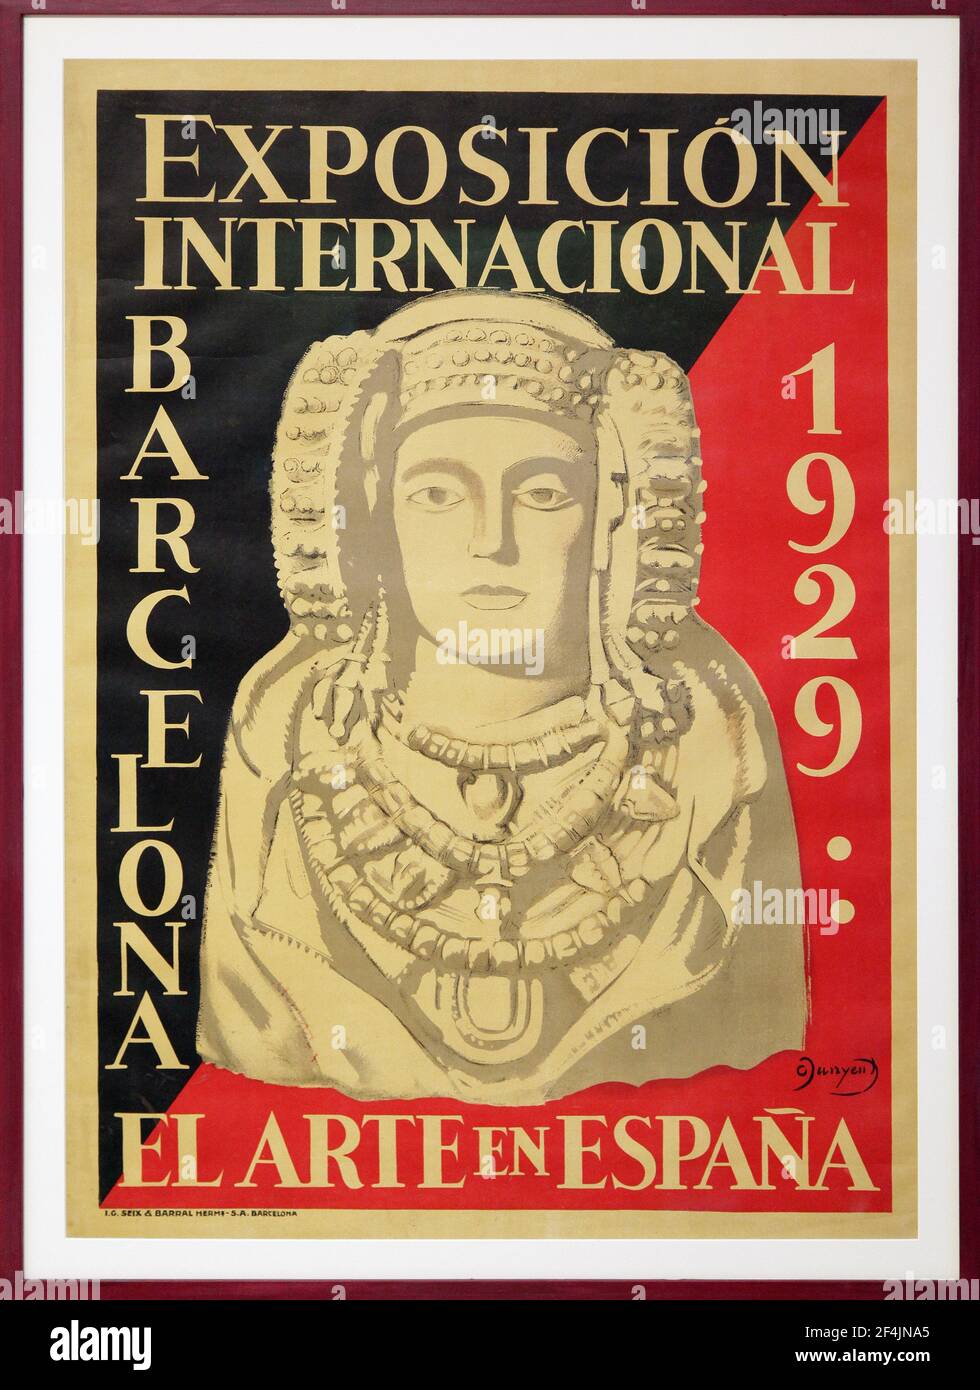 1930 Vintage Poster High Resolution Stock Photography and Images - Alamy